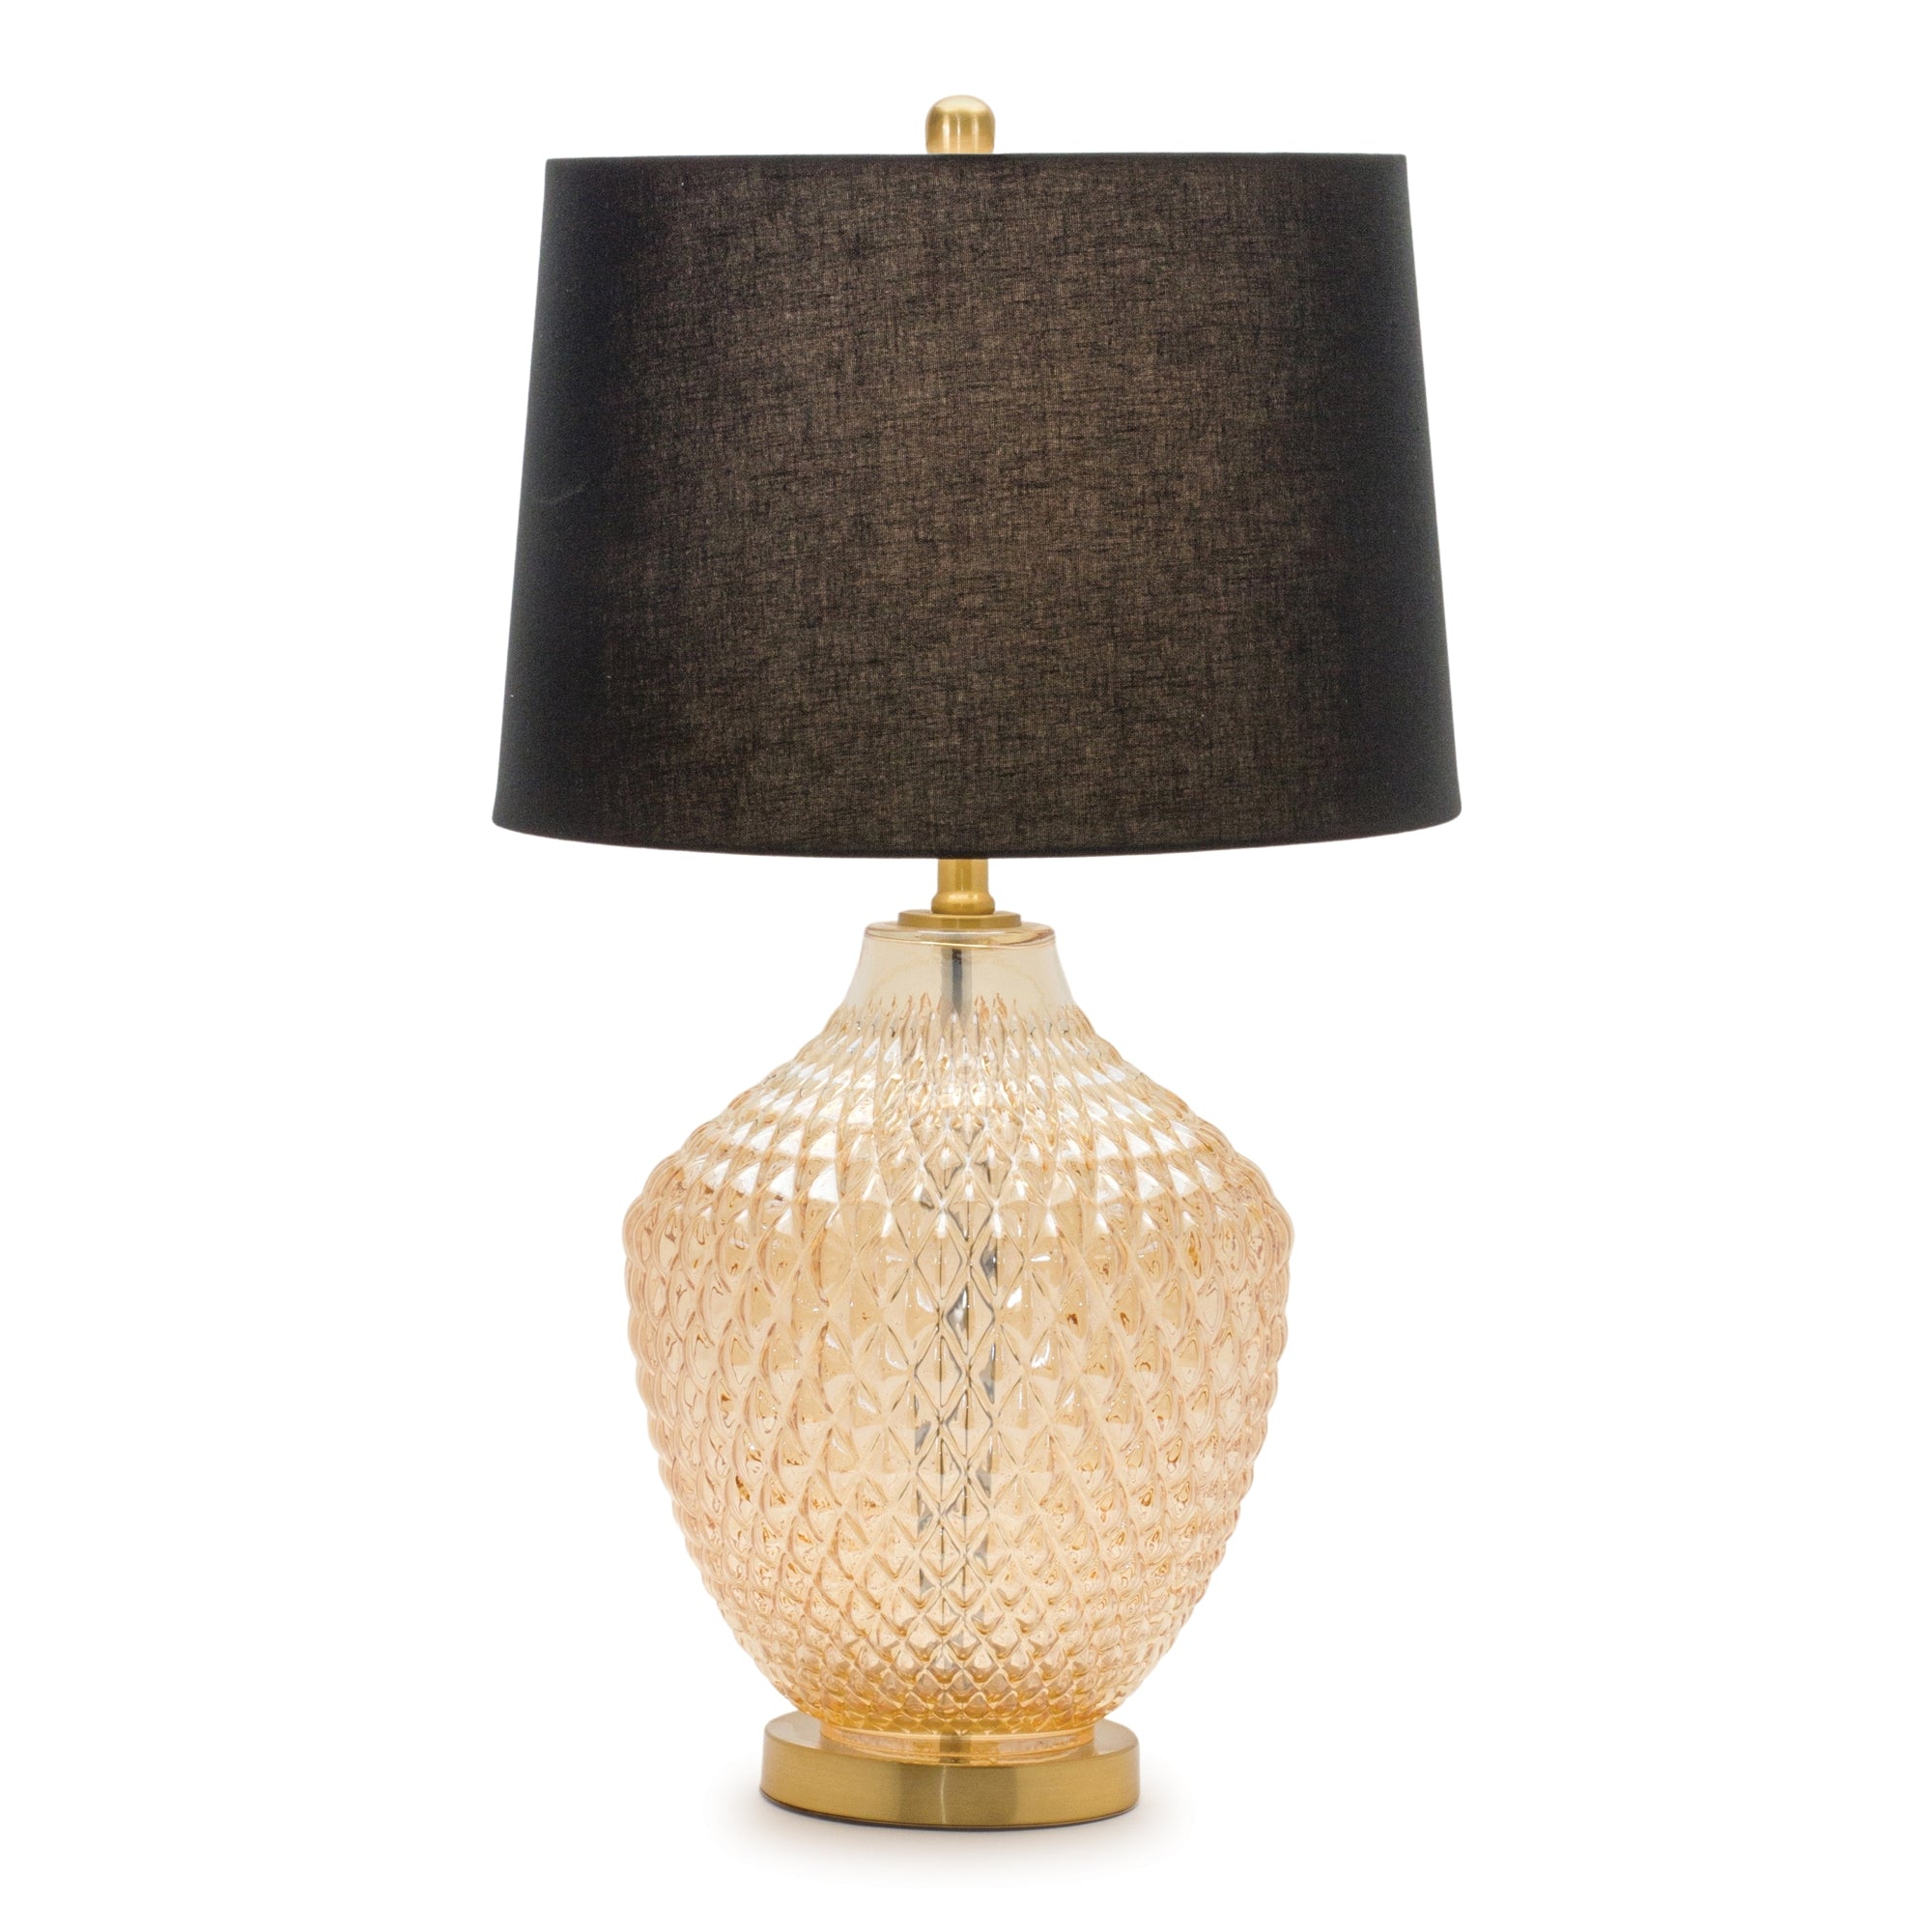 Textured Glass Lamp 28.5"H